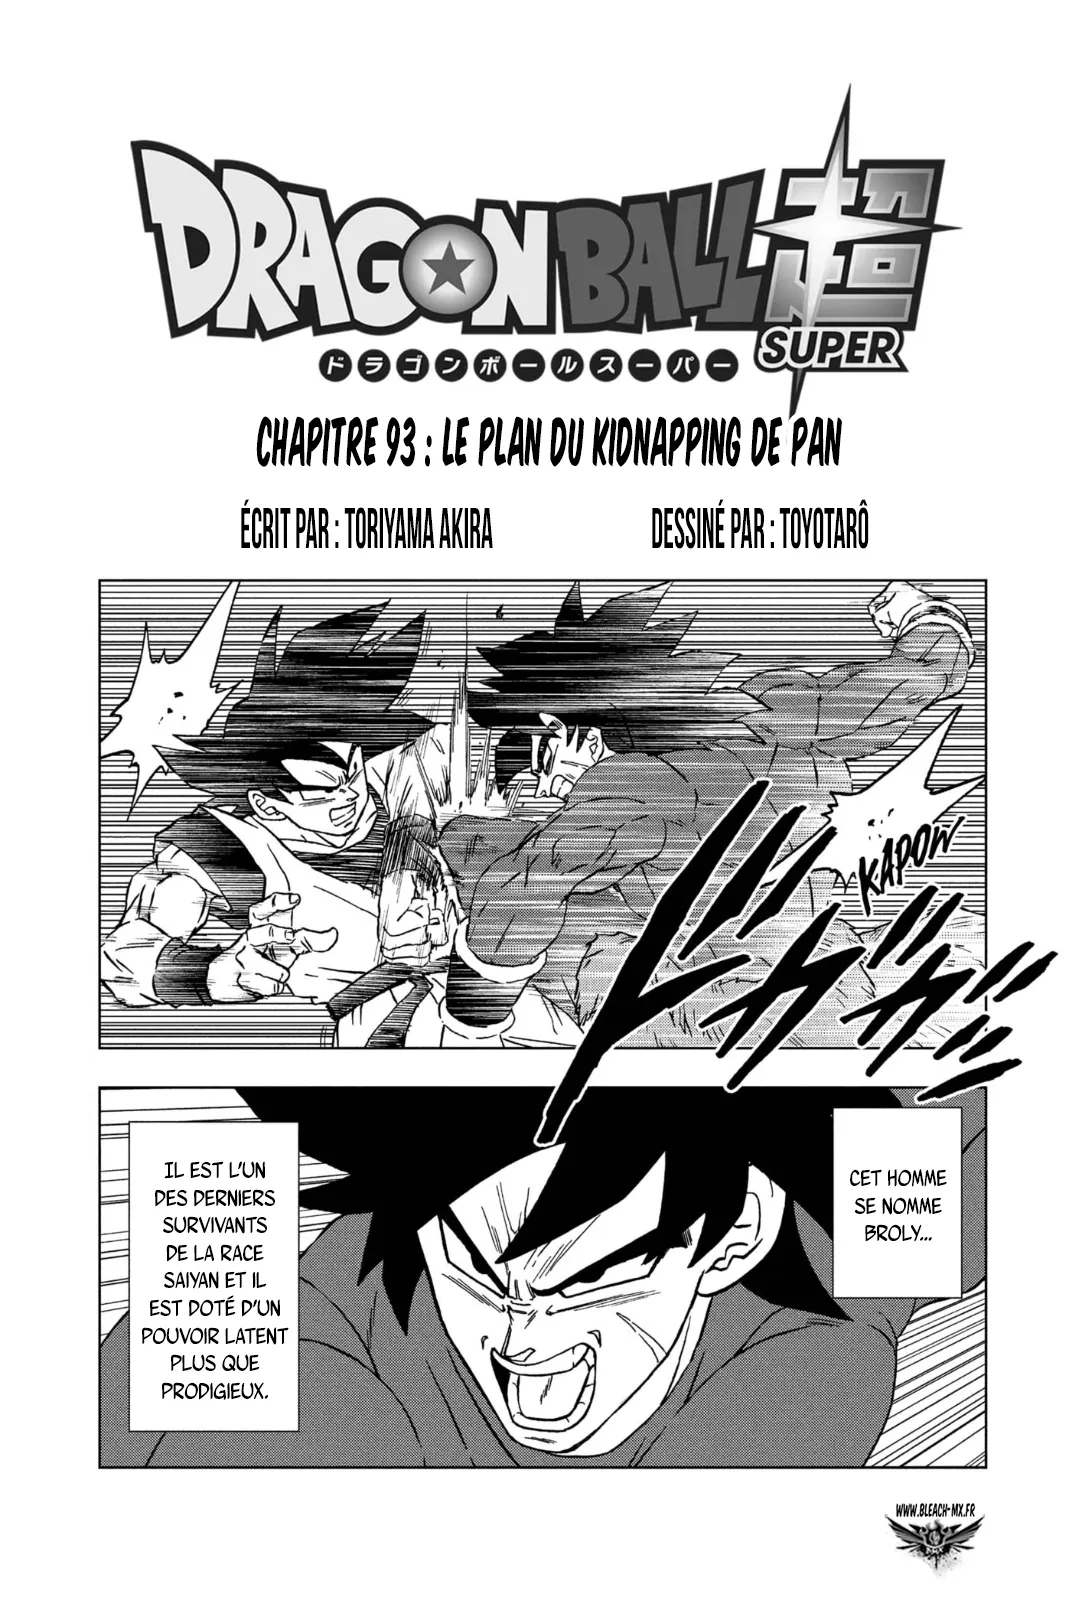 Dragon Ball Super: Chapter chapitre-93 - Page 1